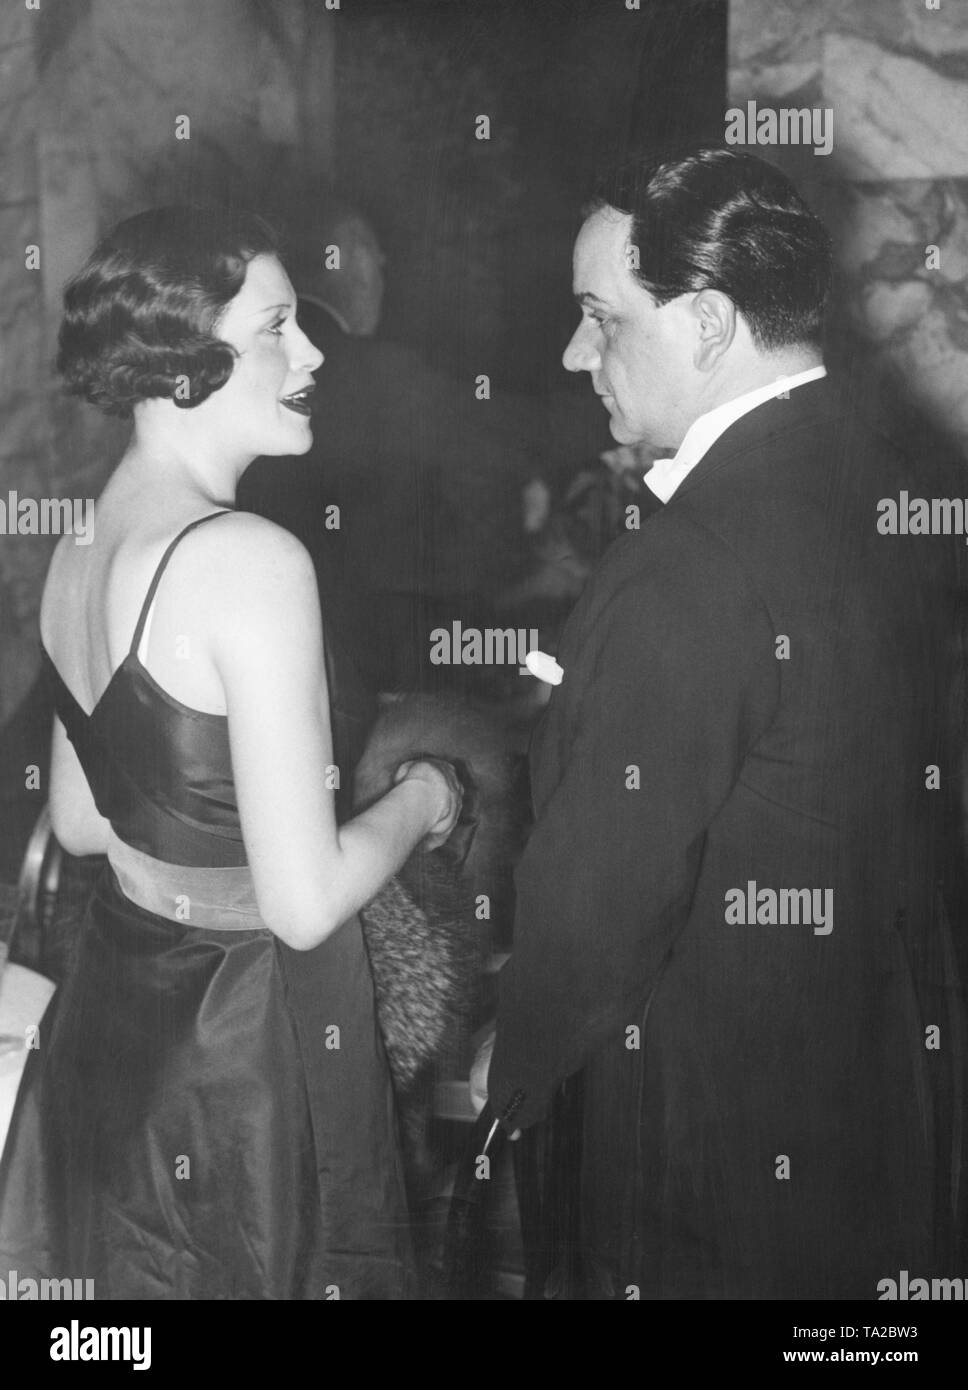 The actress Sybille Schmitz with the director Harry Piel in conversation at the Film Ball in Berlin. Stock Photo